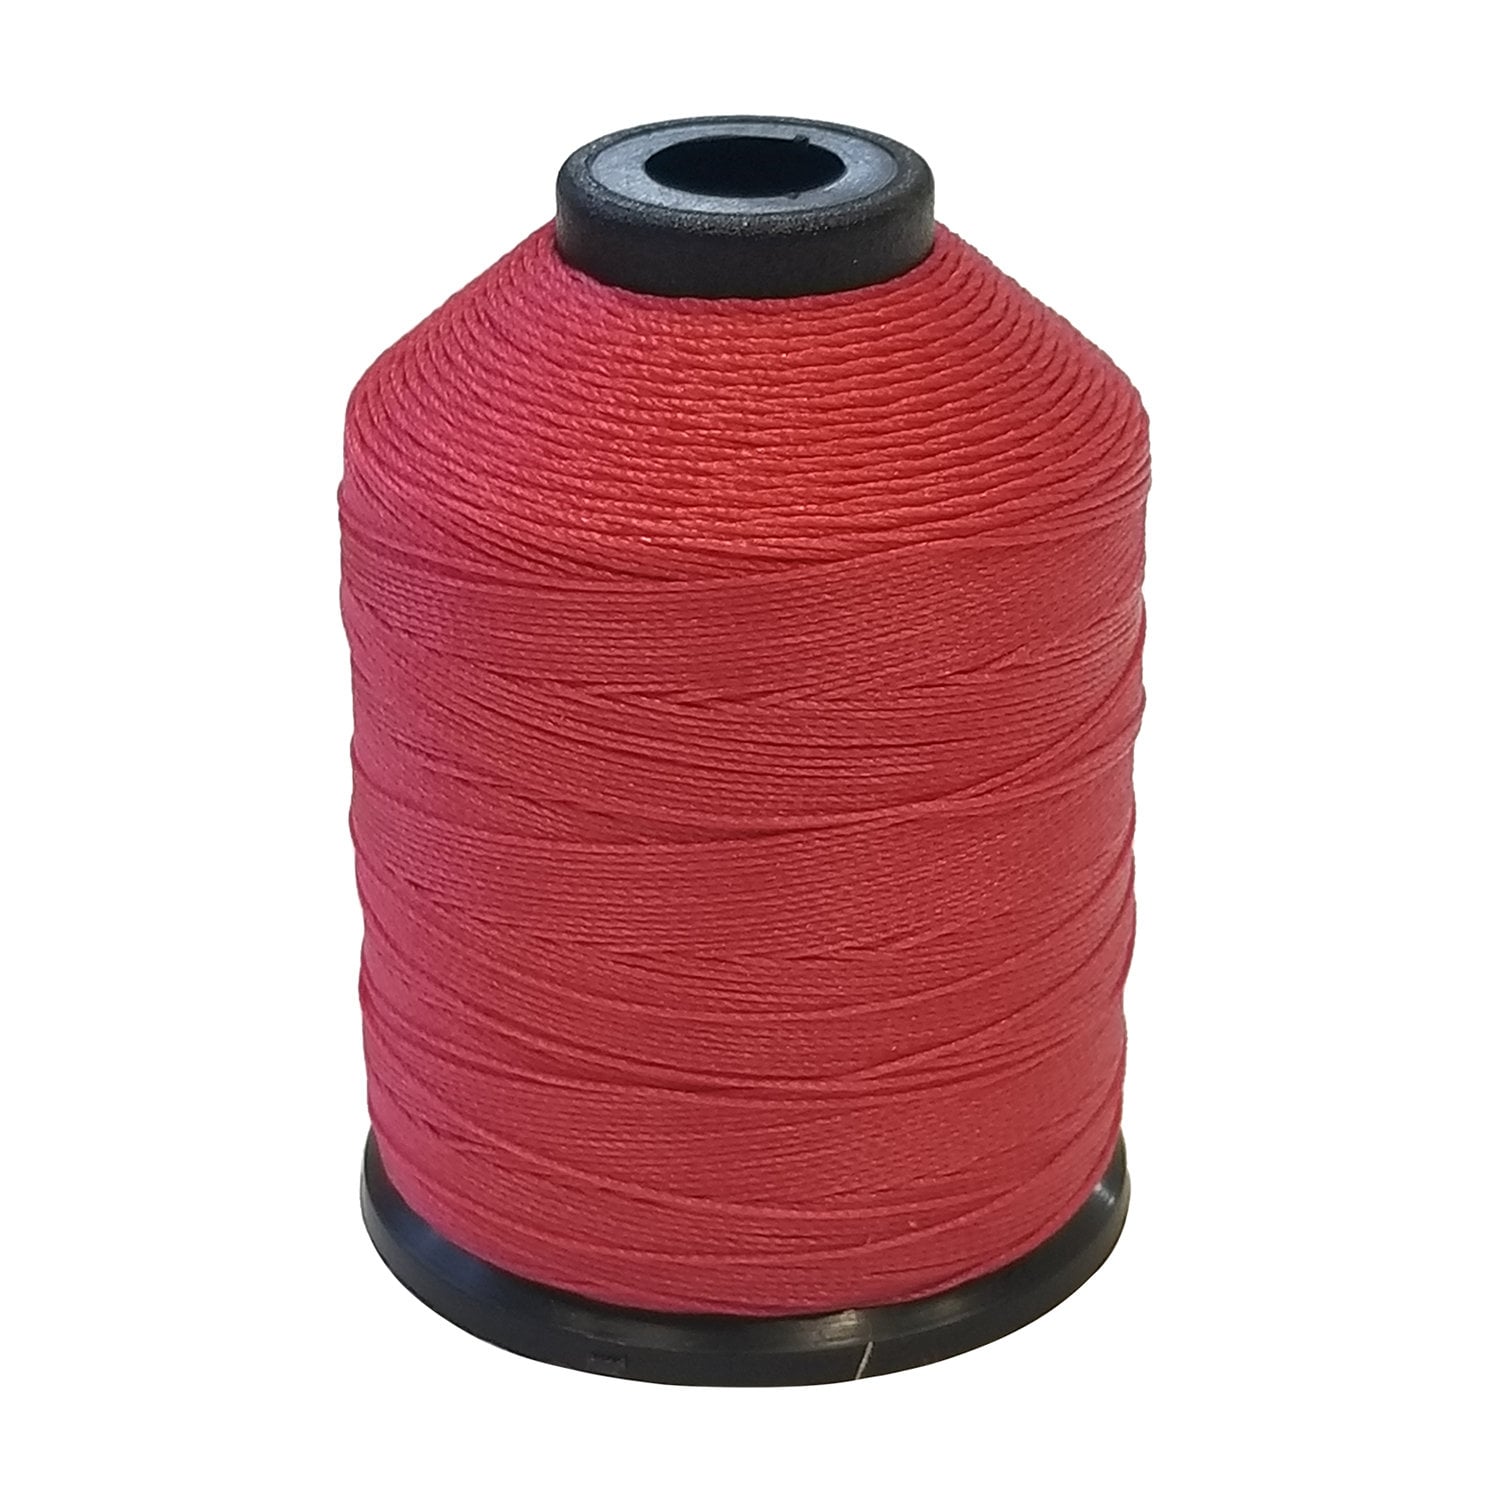 92 (Tex 90) Mid Weight Bonded Nylon/Poly Upholstery Leather Thread (8 oz)